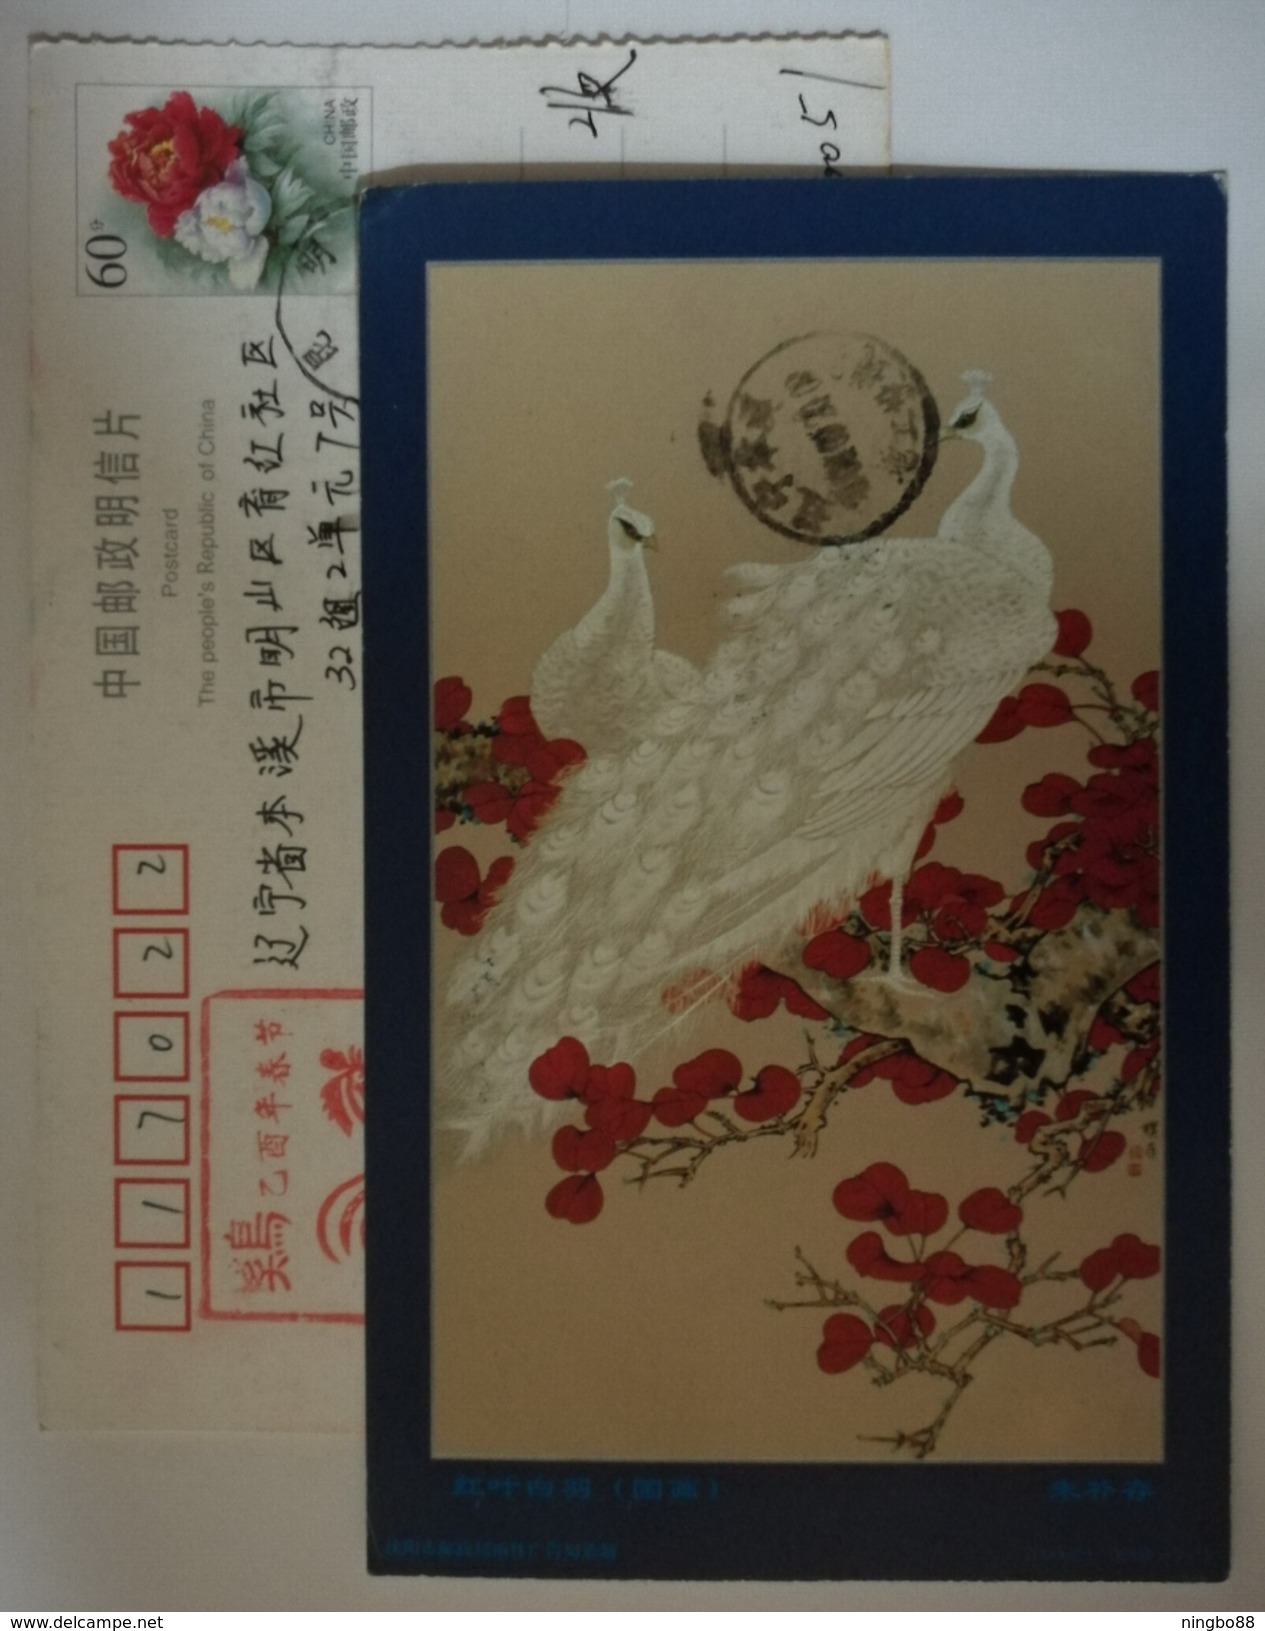 White Peacock,China 2000 Flower & Bird Chinese Painting Postal Stationery Card - Peacocks